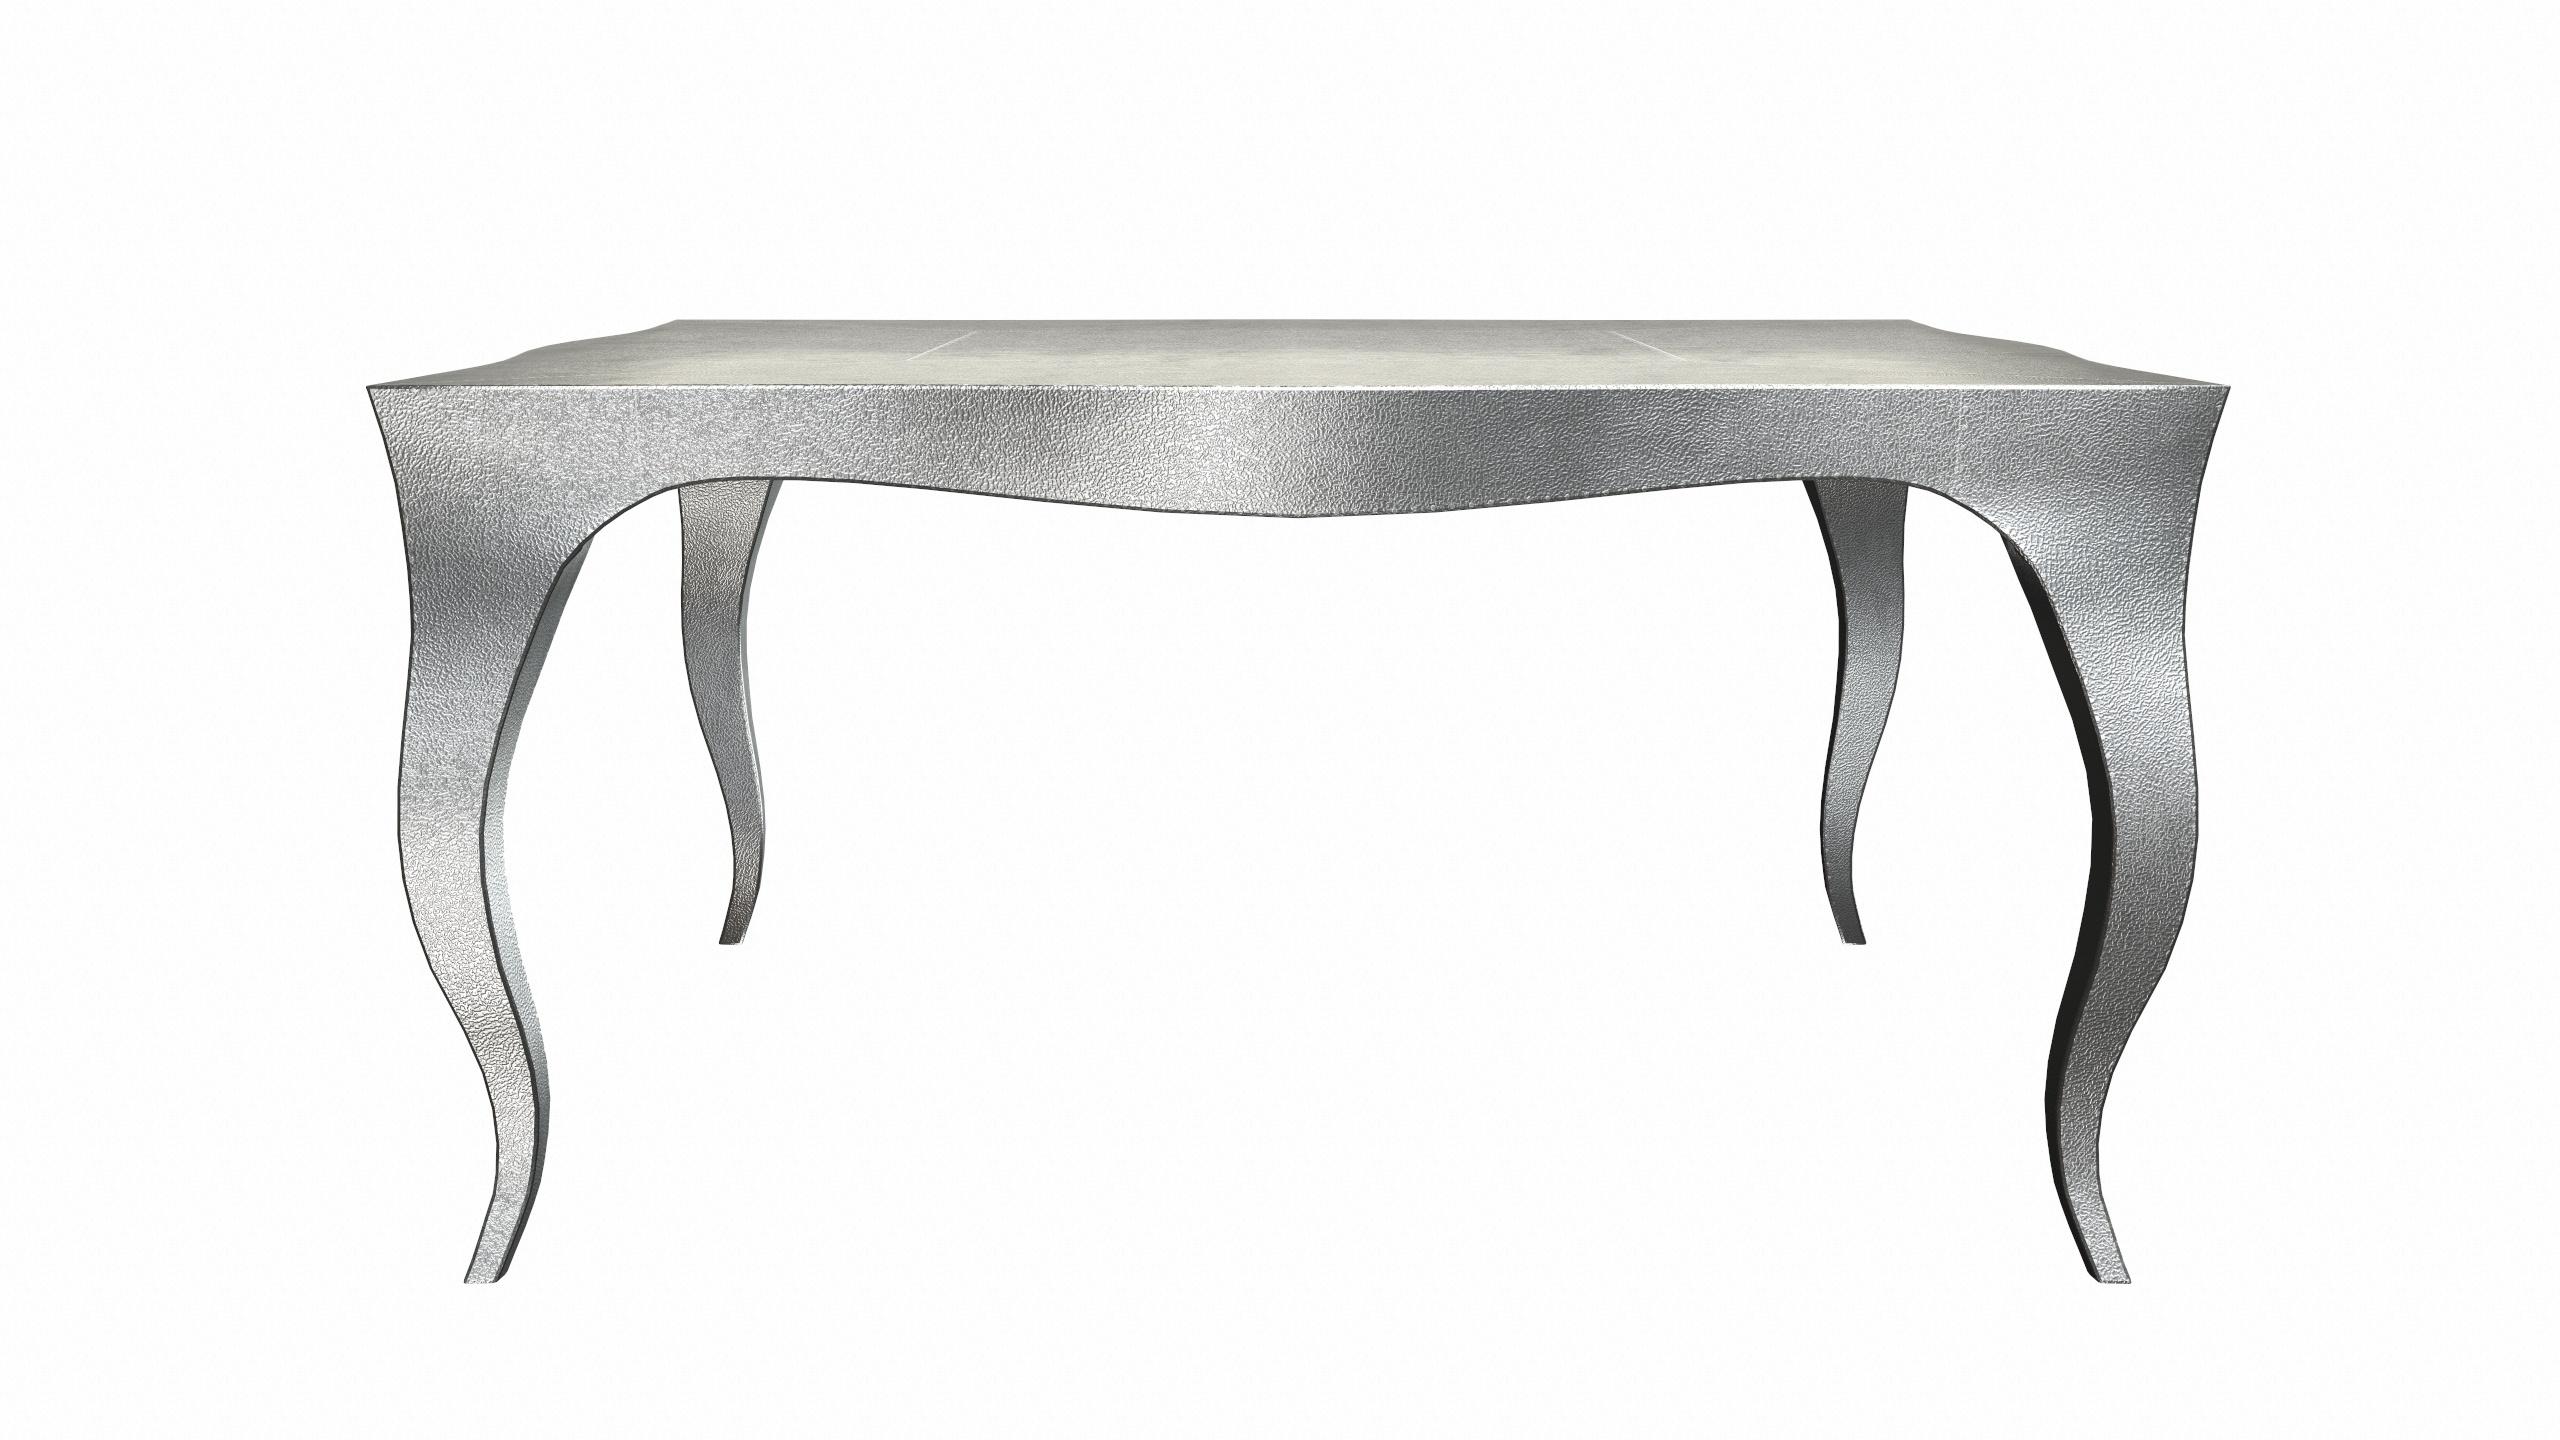 American Louise Art Deco Game Tables Fine Hammered White Bronze by Paul Mathieu For Sale